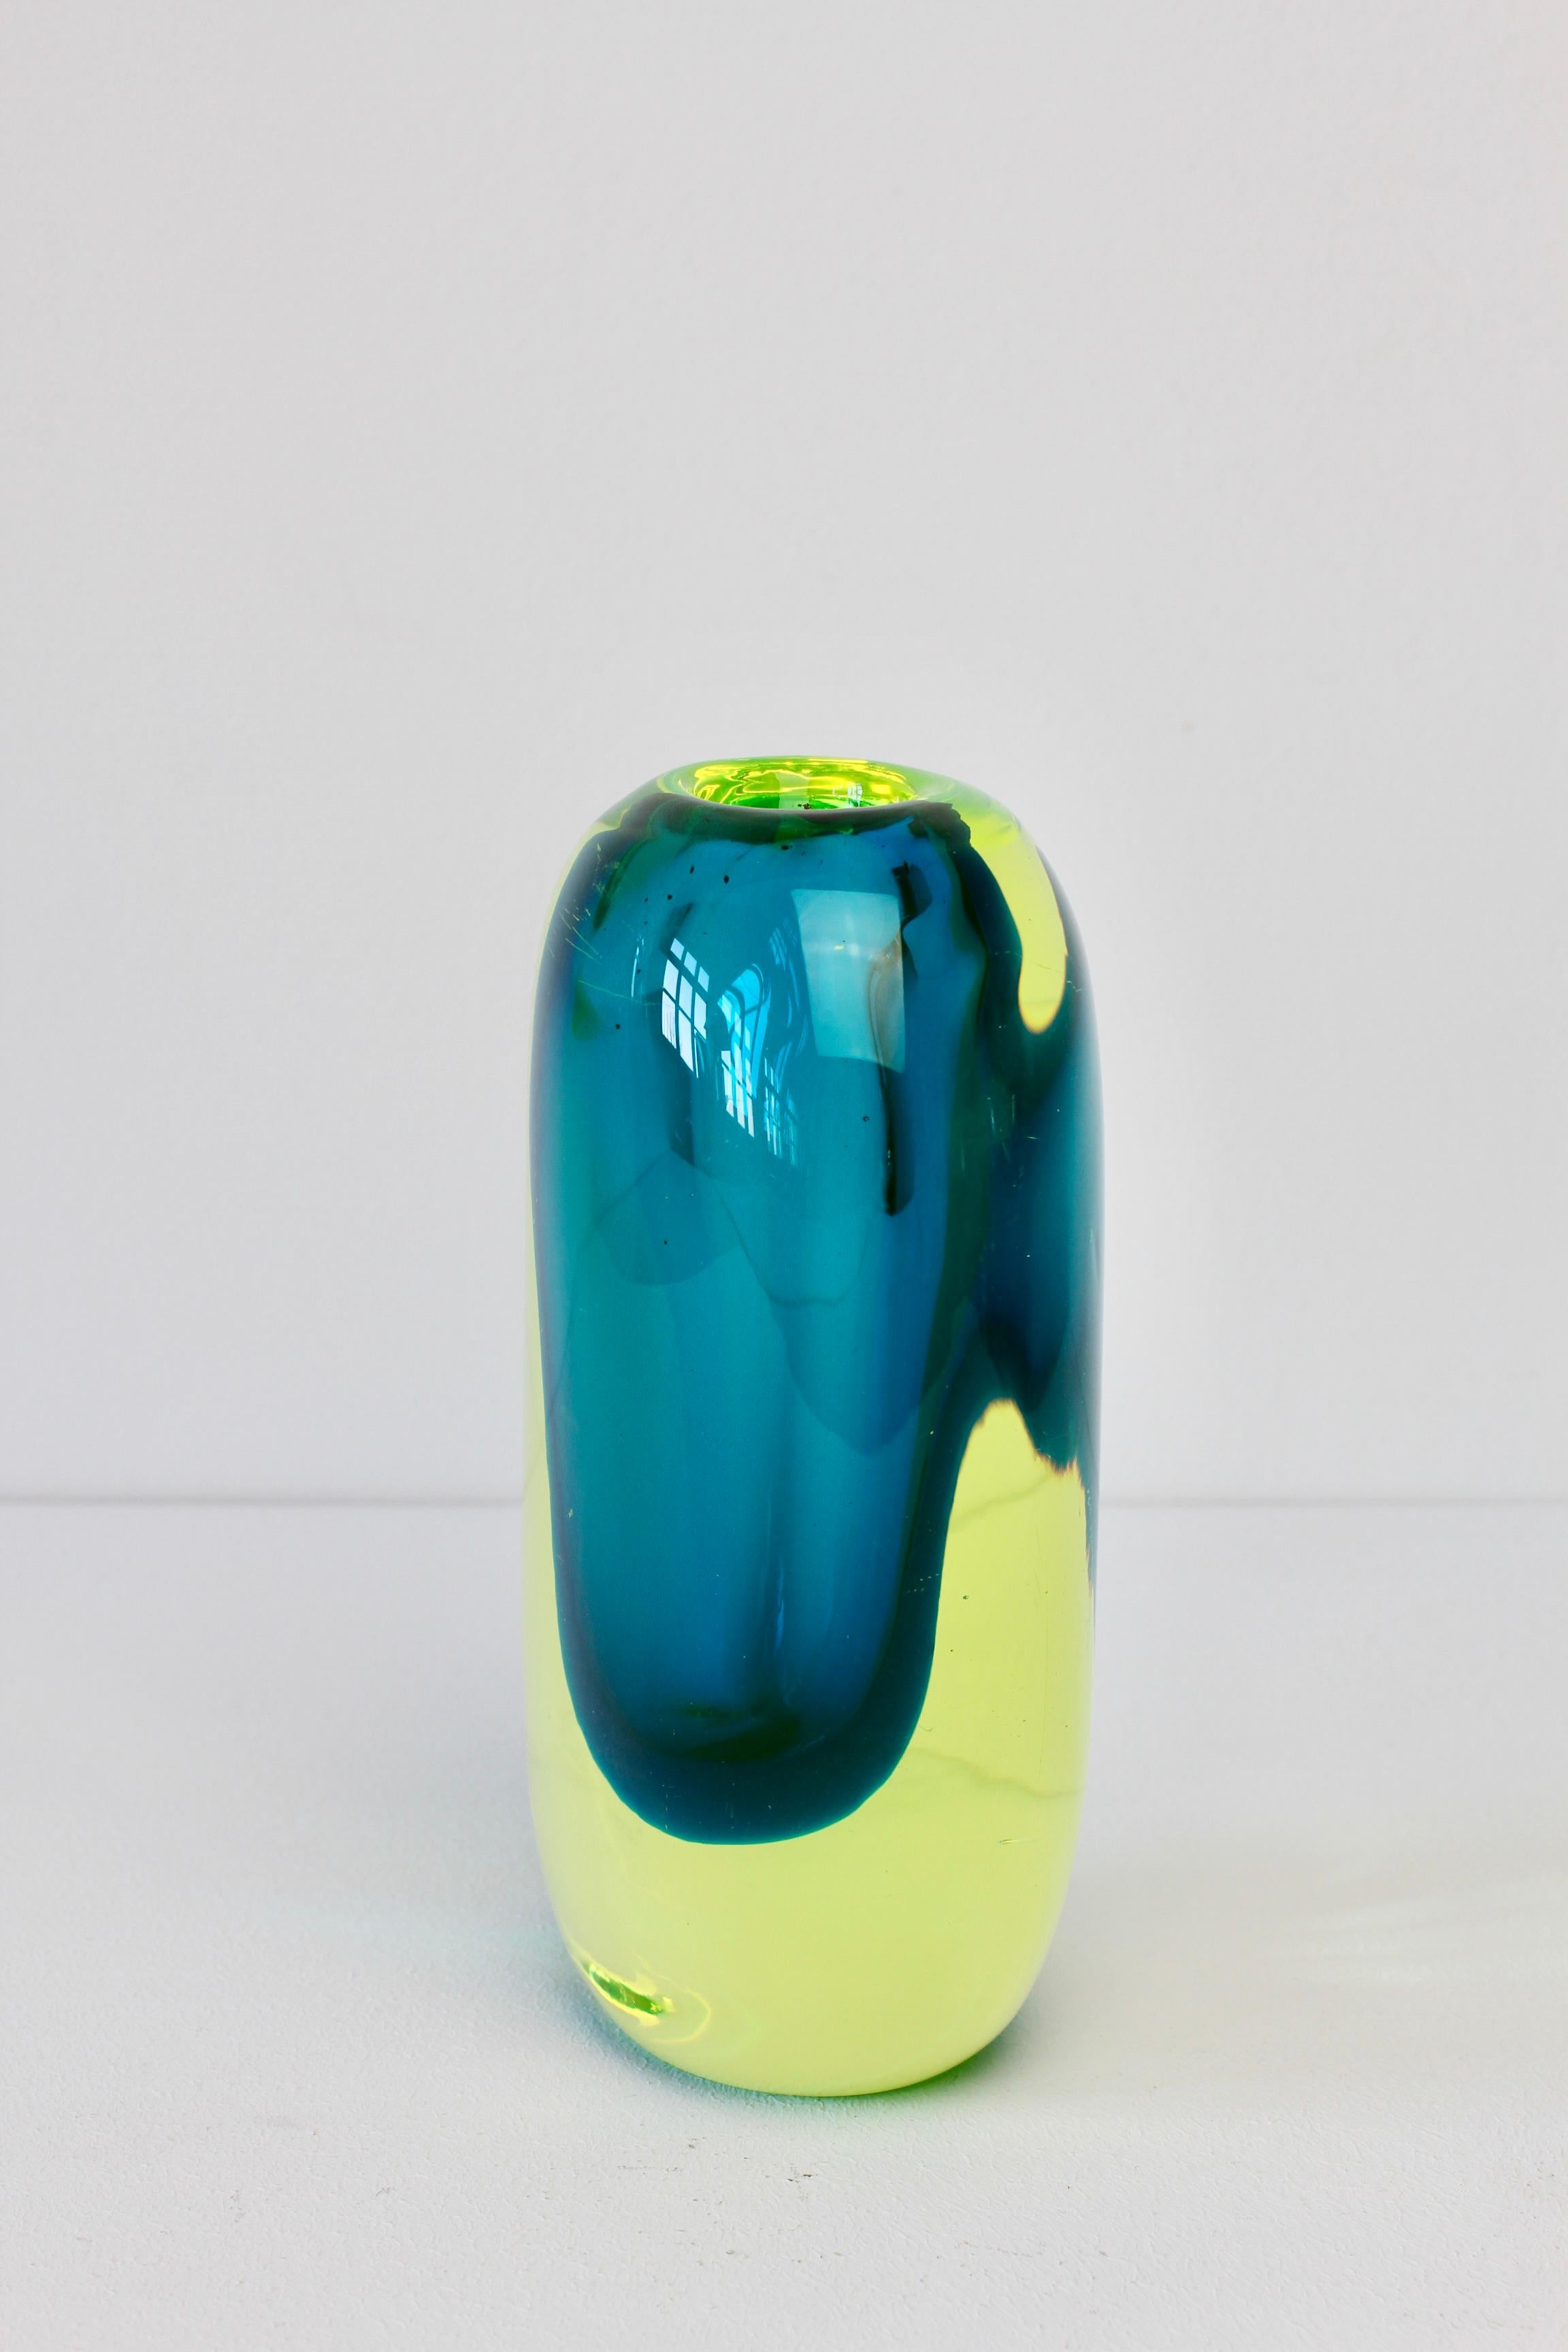 Vintage midcentury heavy and thick neon yellow over turquoise / blue colored glass vase attributed to Murano glass maker Cenedese. The style, form and colors of this piece do feel like that of known designs by Antonio da Ros - also similar to works